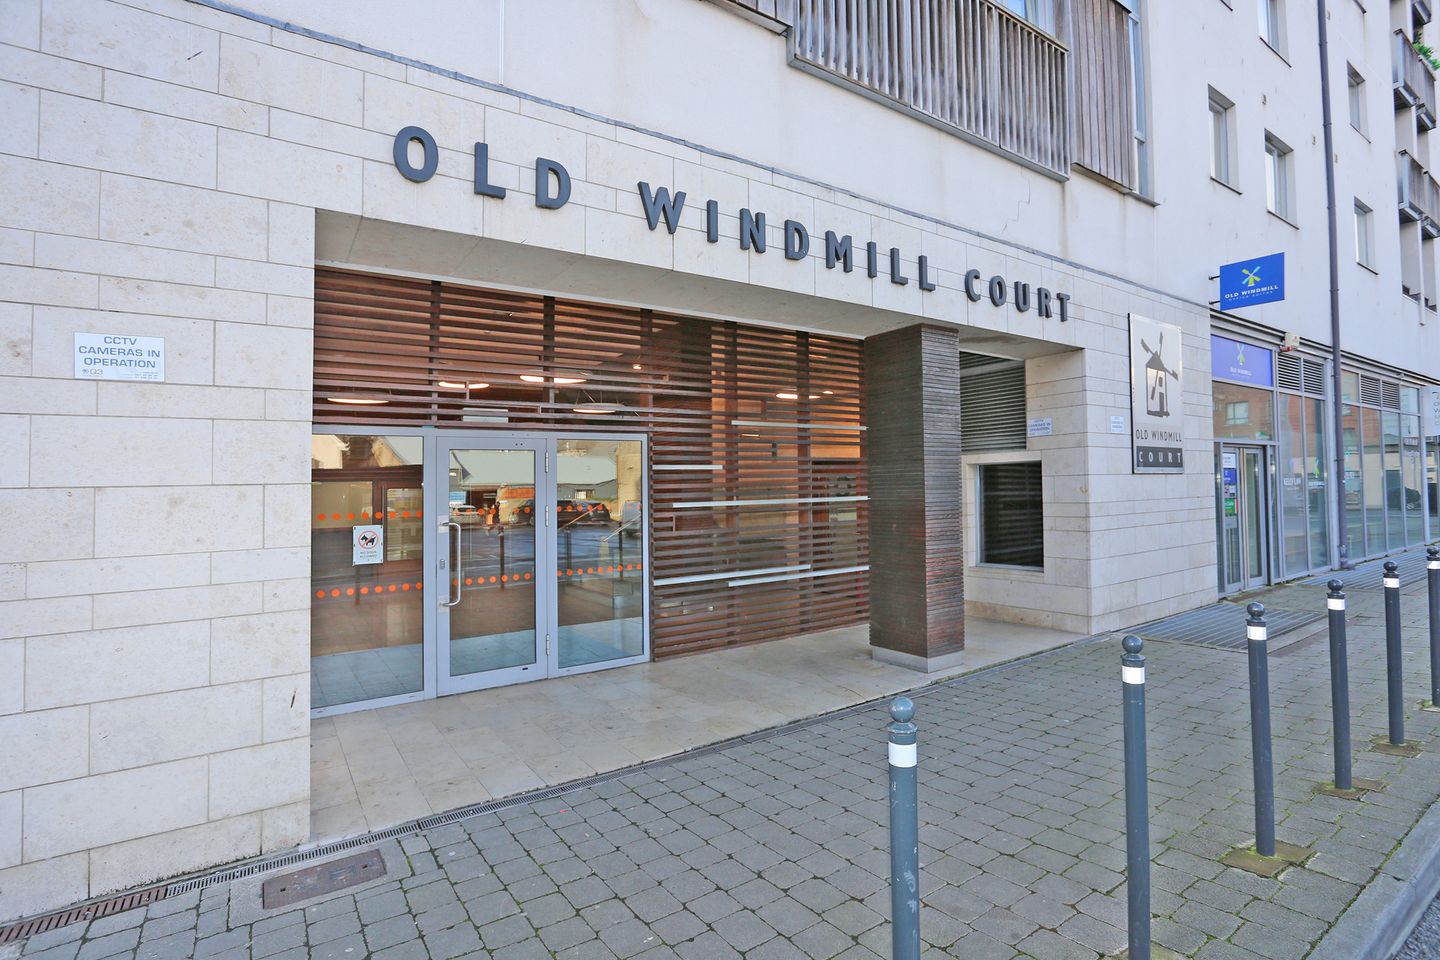 Apartment 12, Old Windmill Court, Limerick City, Co. Limerick, V94Y772